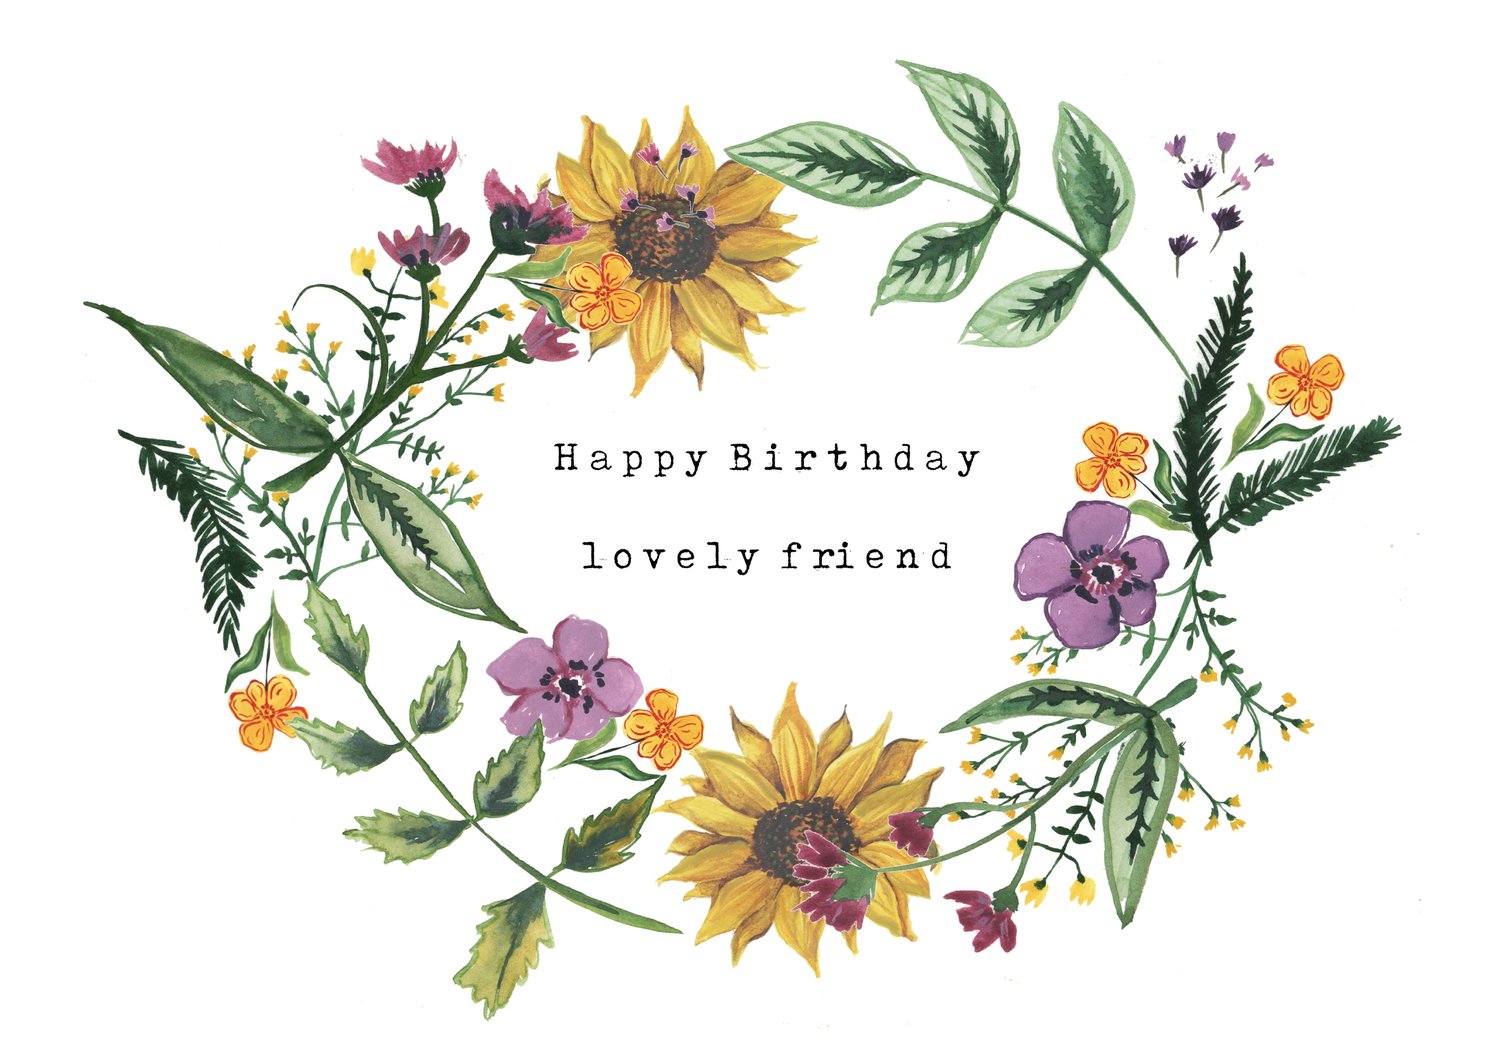 Happy Birthday lovely friend greeting card — Mary's House Designs ...